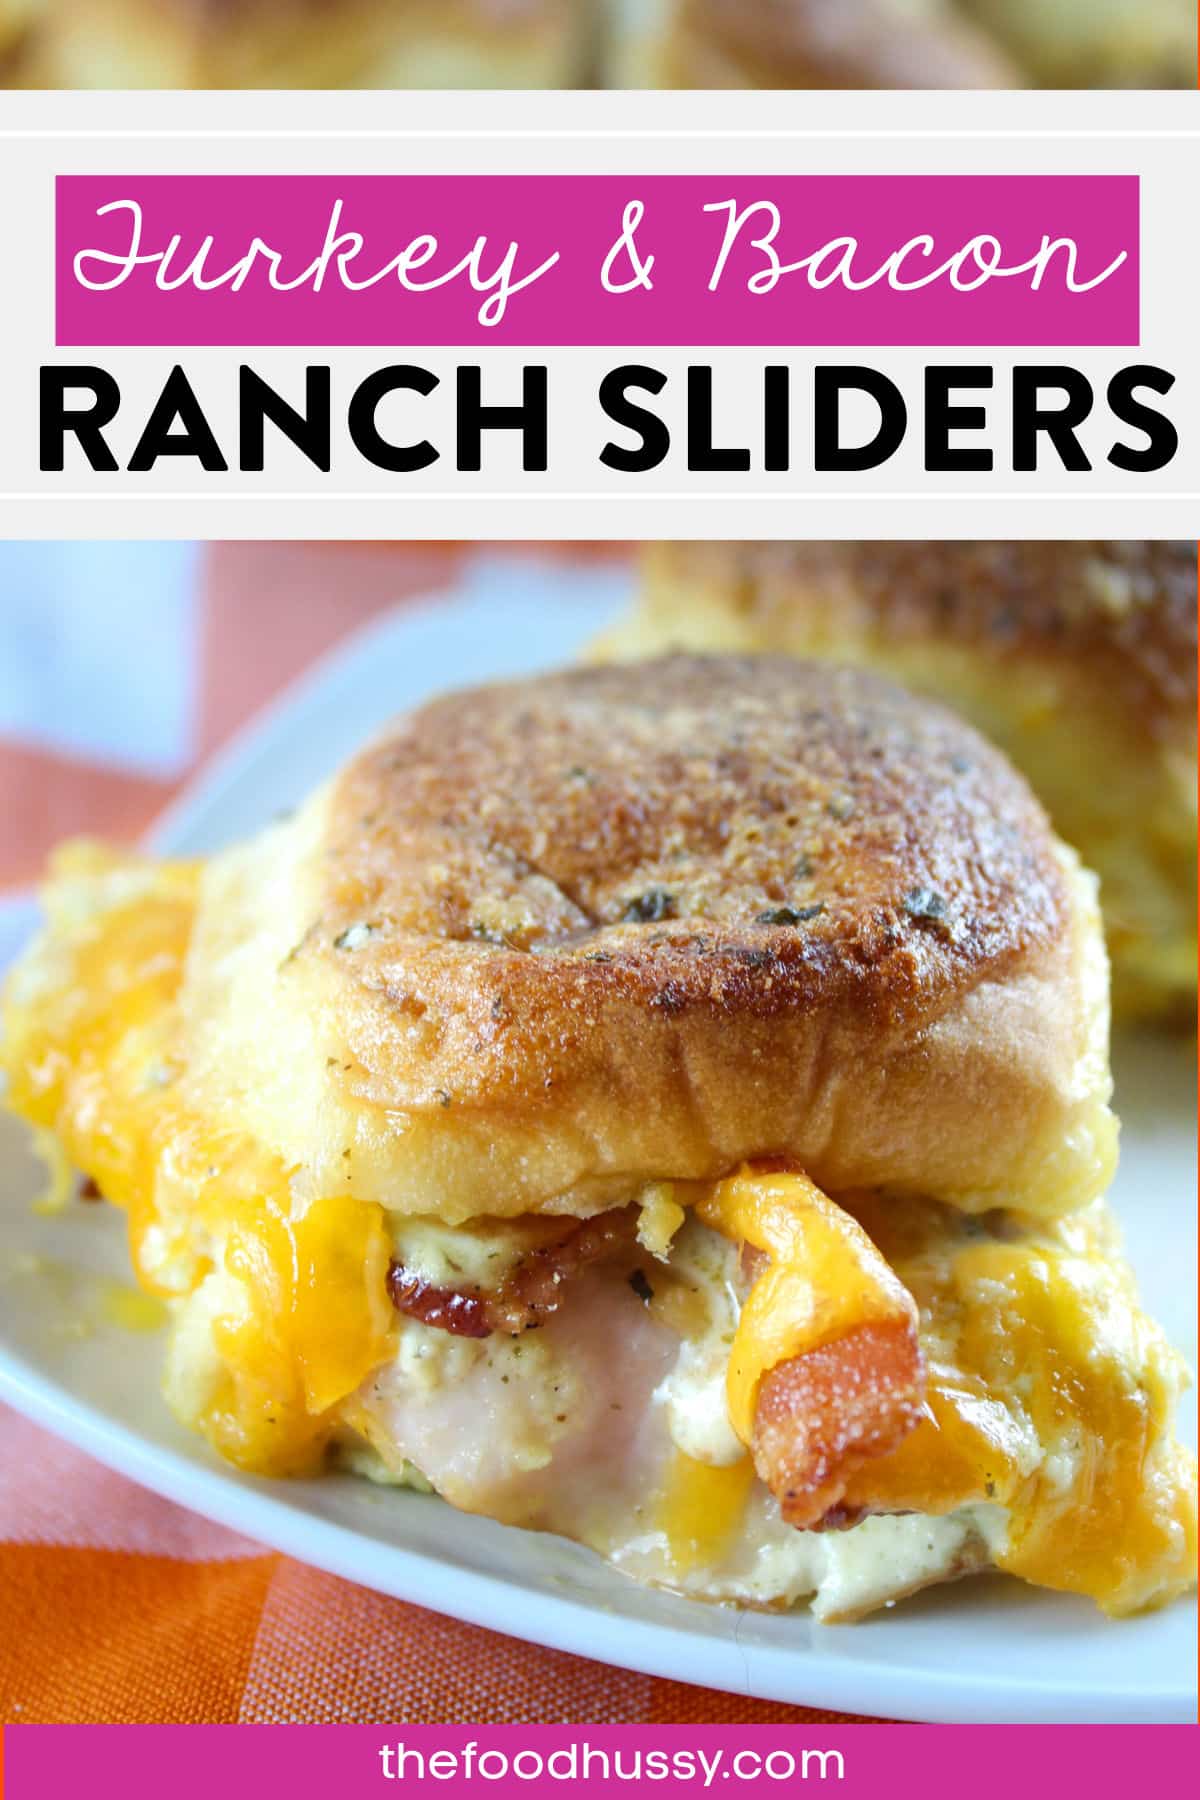 These Turkey Bacon Ranch Sliders are my favorite sliders! Every bite is so delicious - full of lean sliced turkey, crispy meaty bacon, melty cheddar cheese and loads of ranch dressing! Turkey, bacon & ranch are a great combination of flavors! via @foodhussy